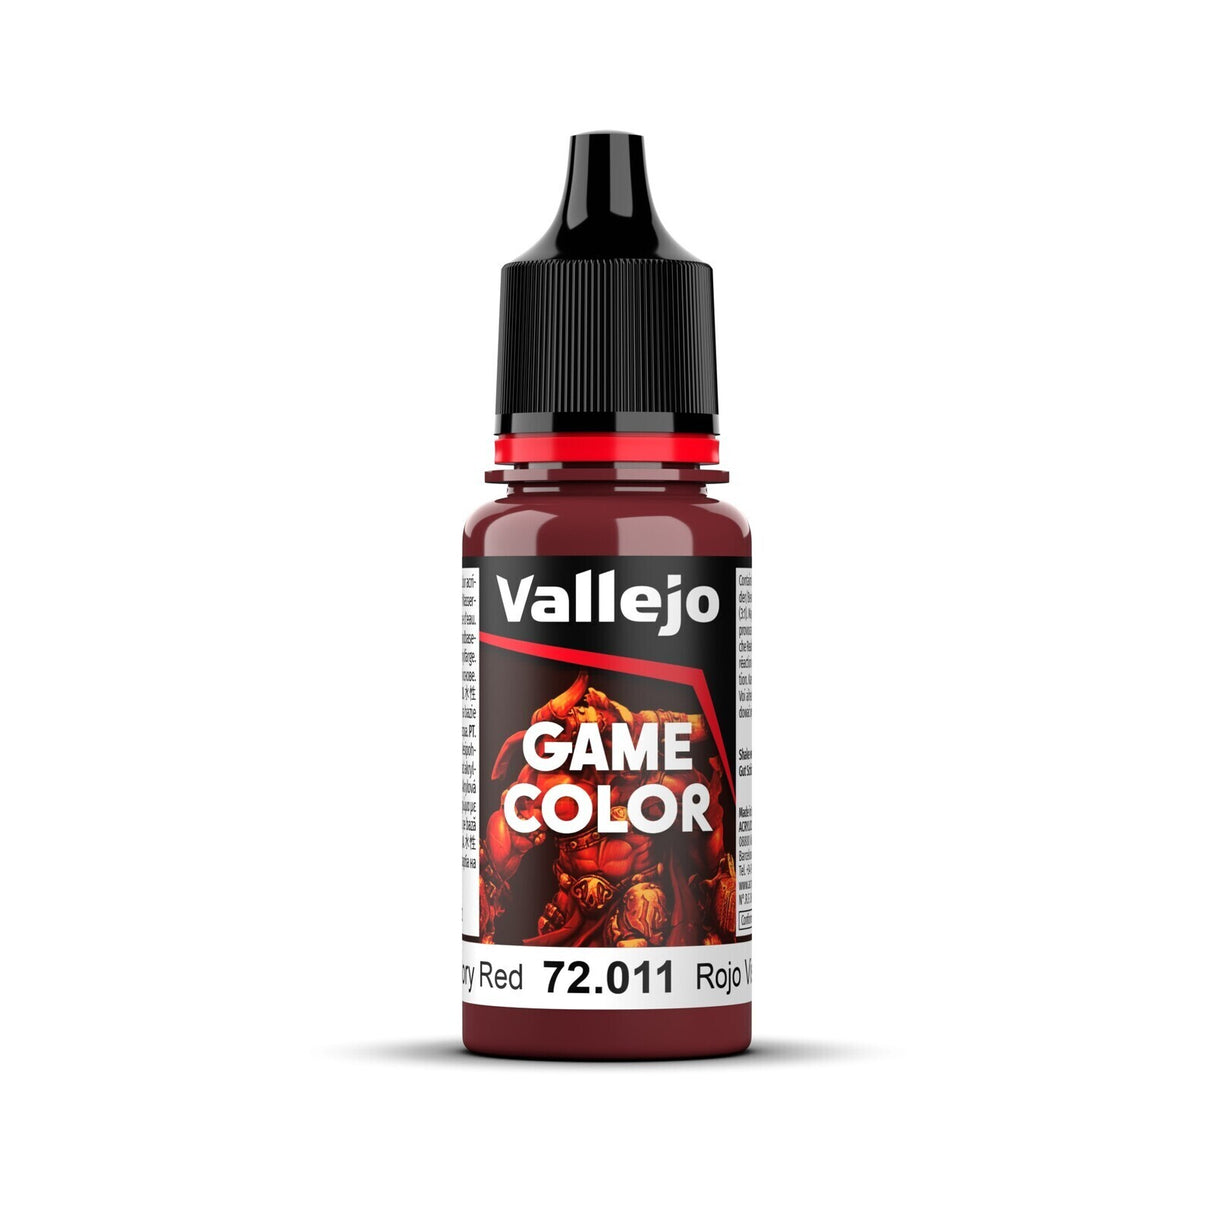 Vallejo Game Color Gory Red 18ml Acrylic Paint - Hobbytech Toys